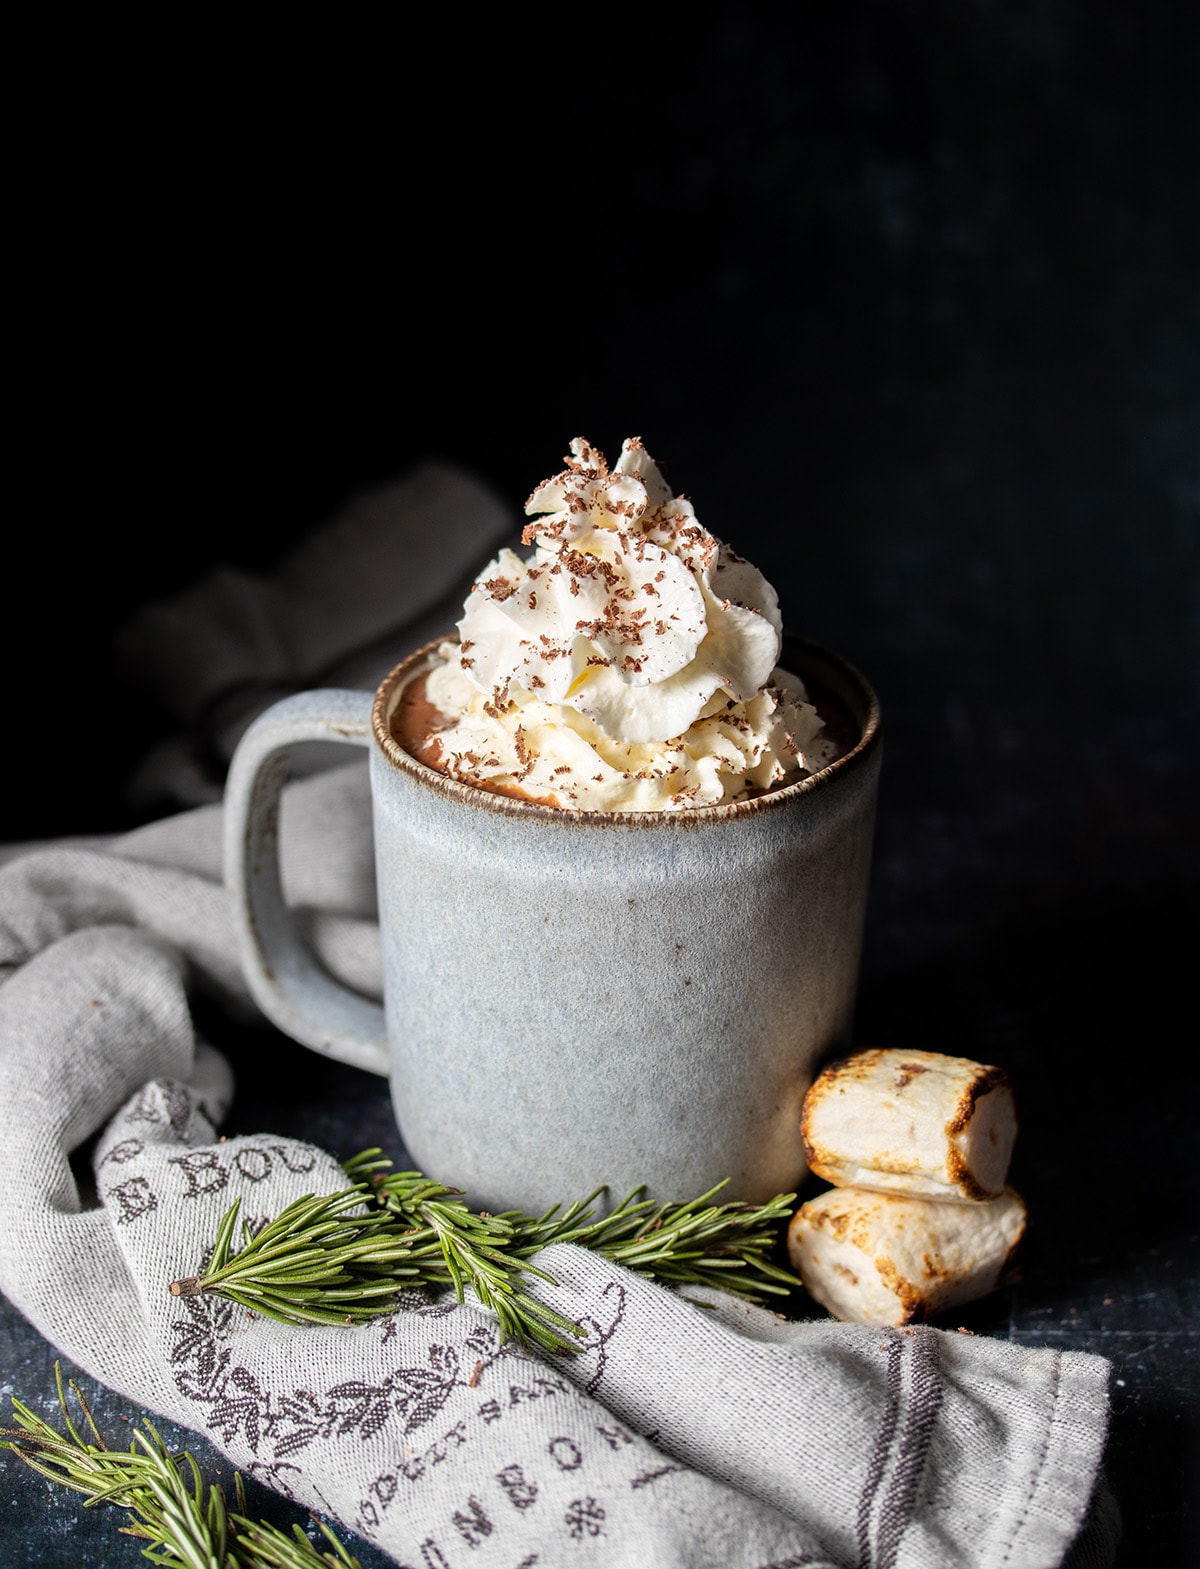 Grey mug with a grey napkin with writing wrapped around it filled with hot cocoa and topped with whipped cream next to burnt marshmallows.